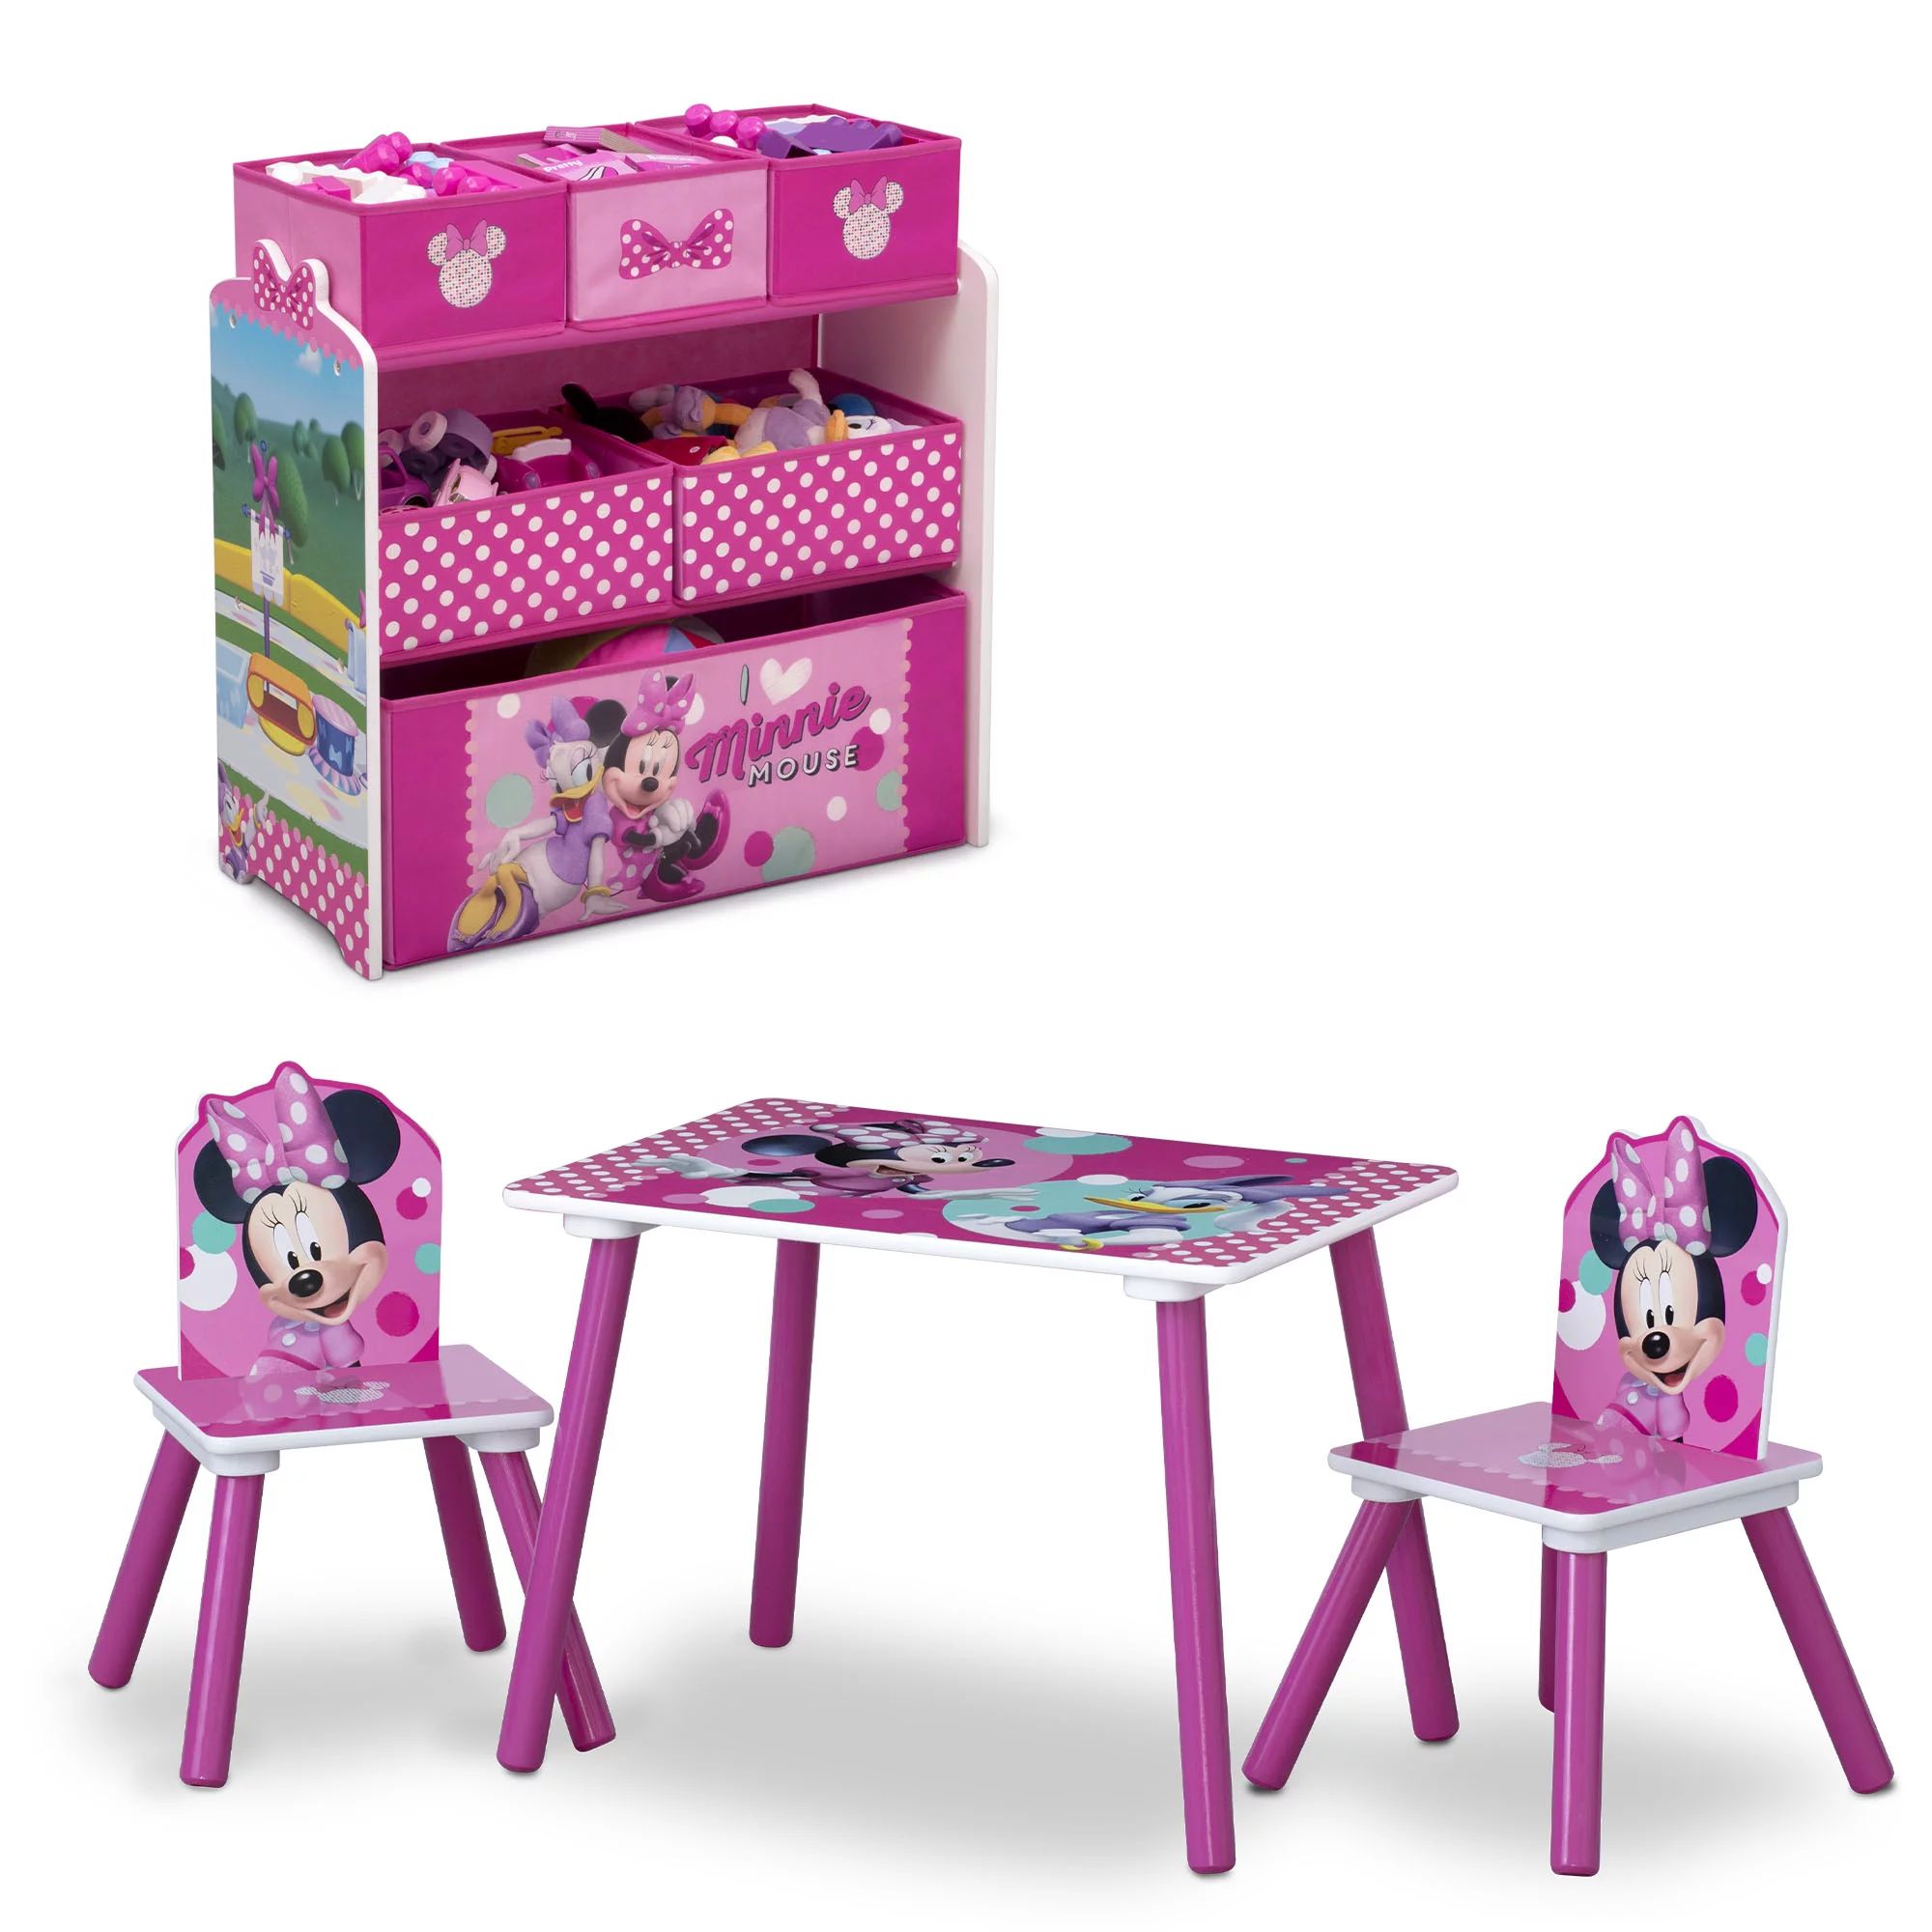 Minnie Mouse 4-Piece Wood Toddler Playroom Set – Includes Table, 2 Chairs & Toy Bin, Pink | Walmart (US)